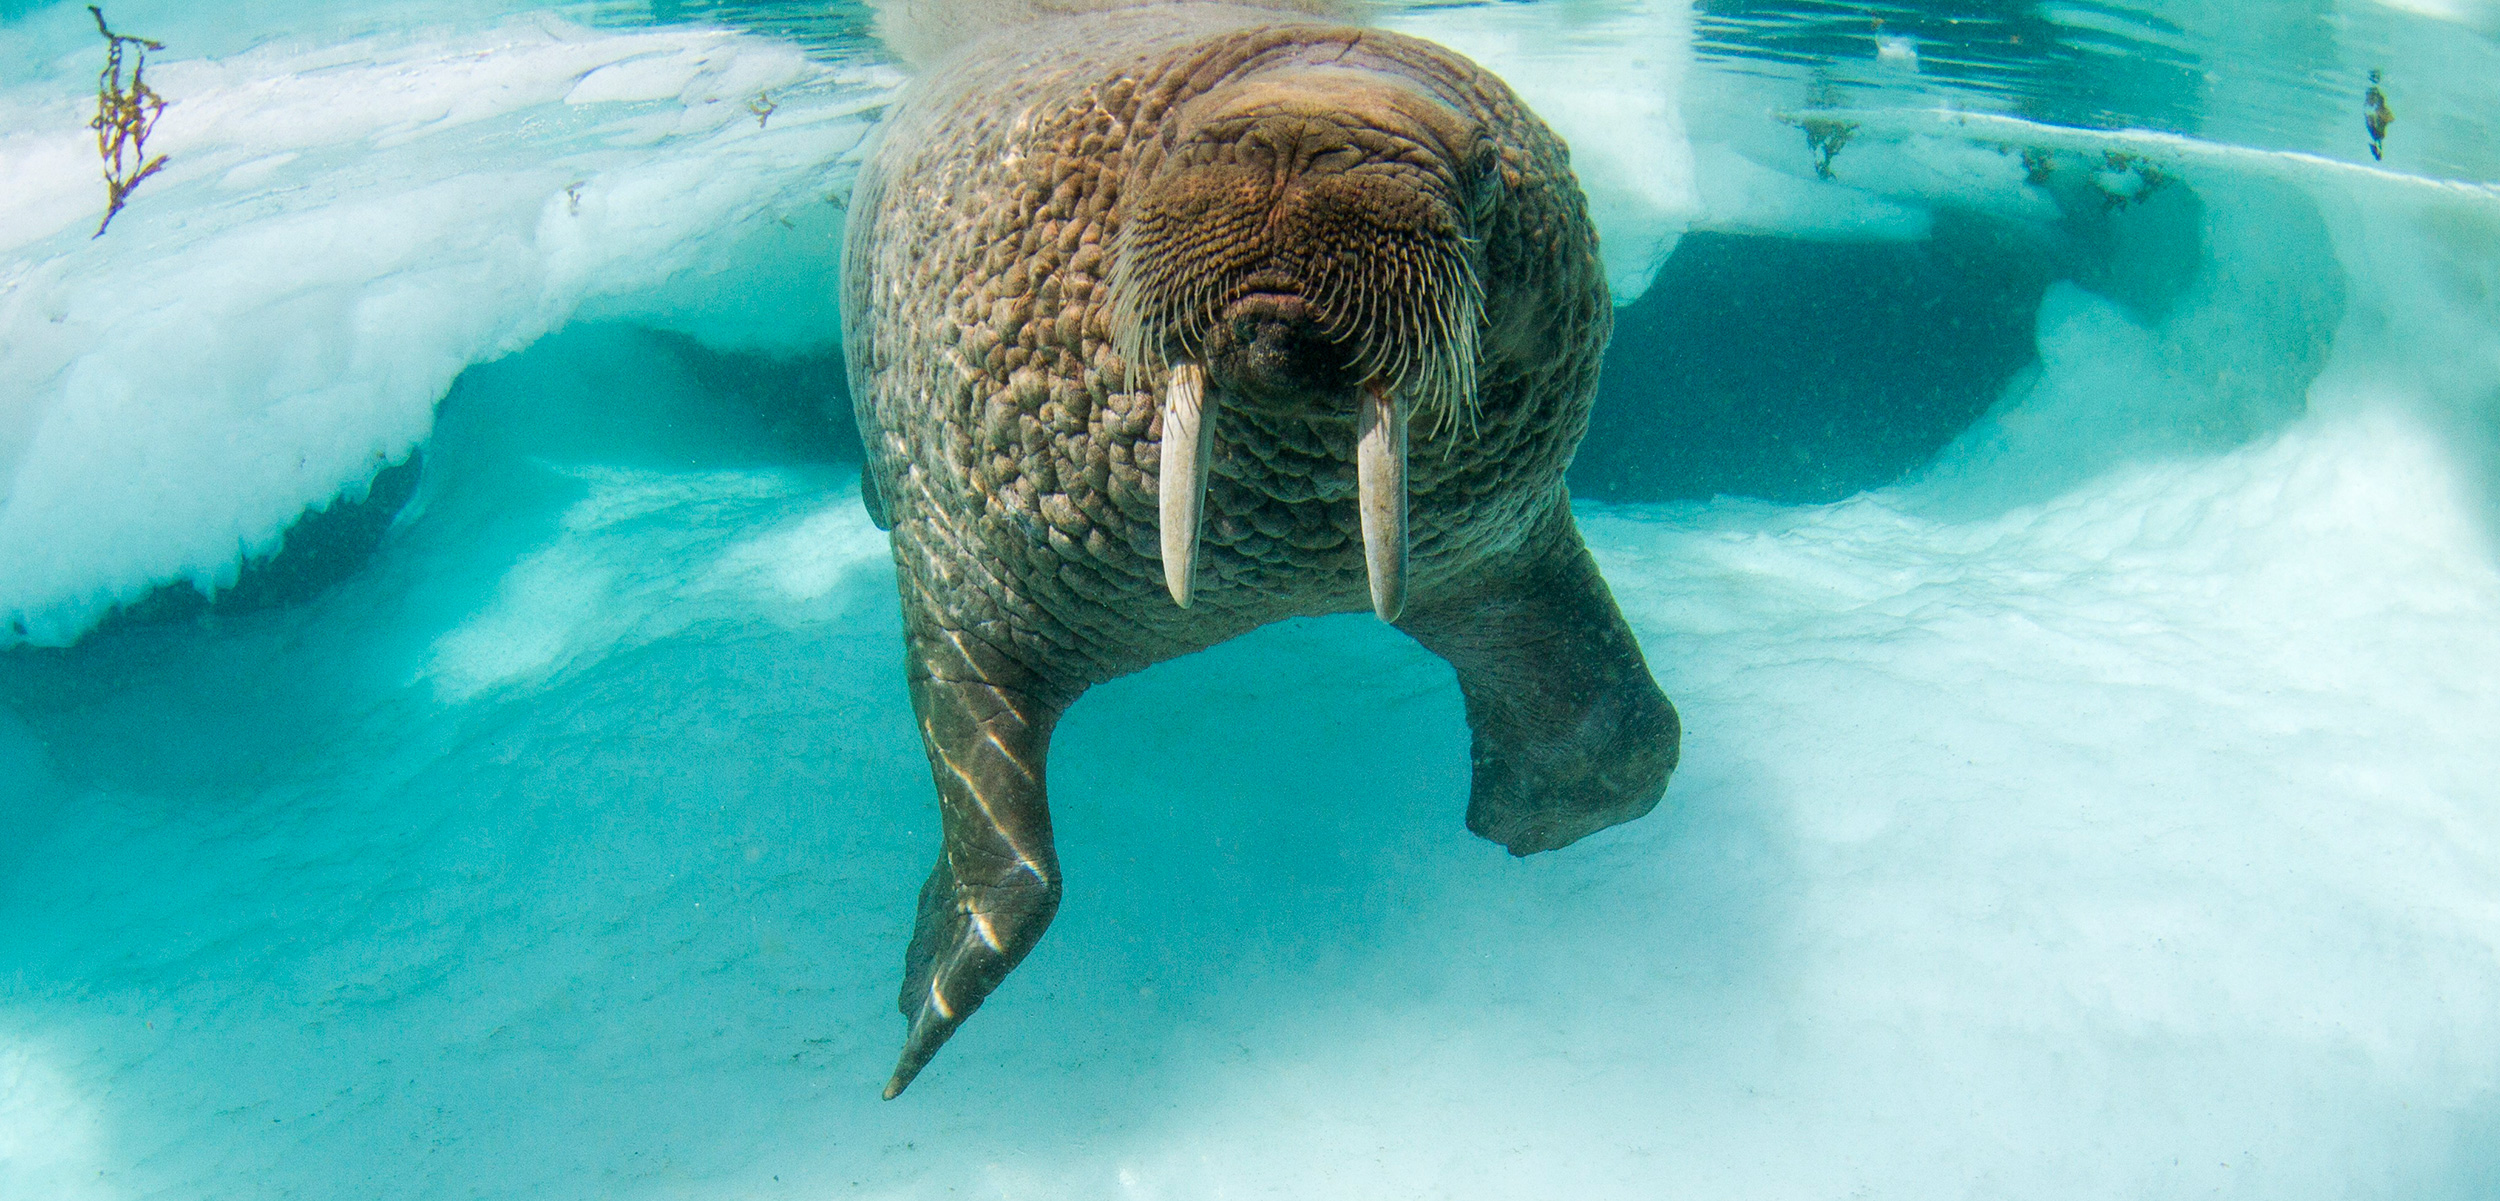 The lives of walruses, humans, and polar bears have always been intertwined. How are they faring in the face of a changing Arctic? Photo by Paul Souders/Corbis